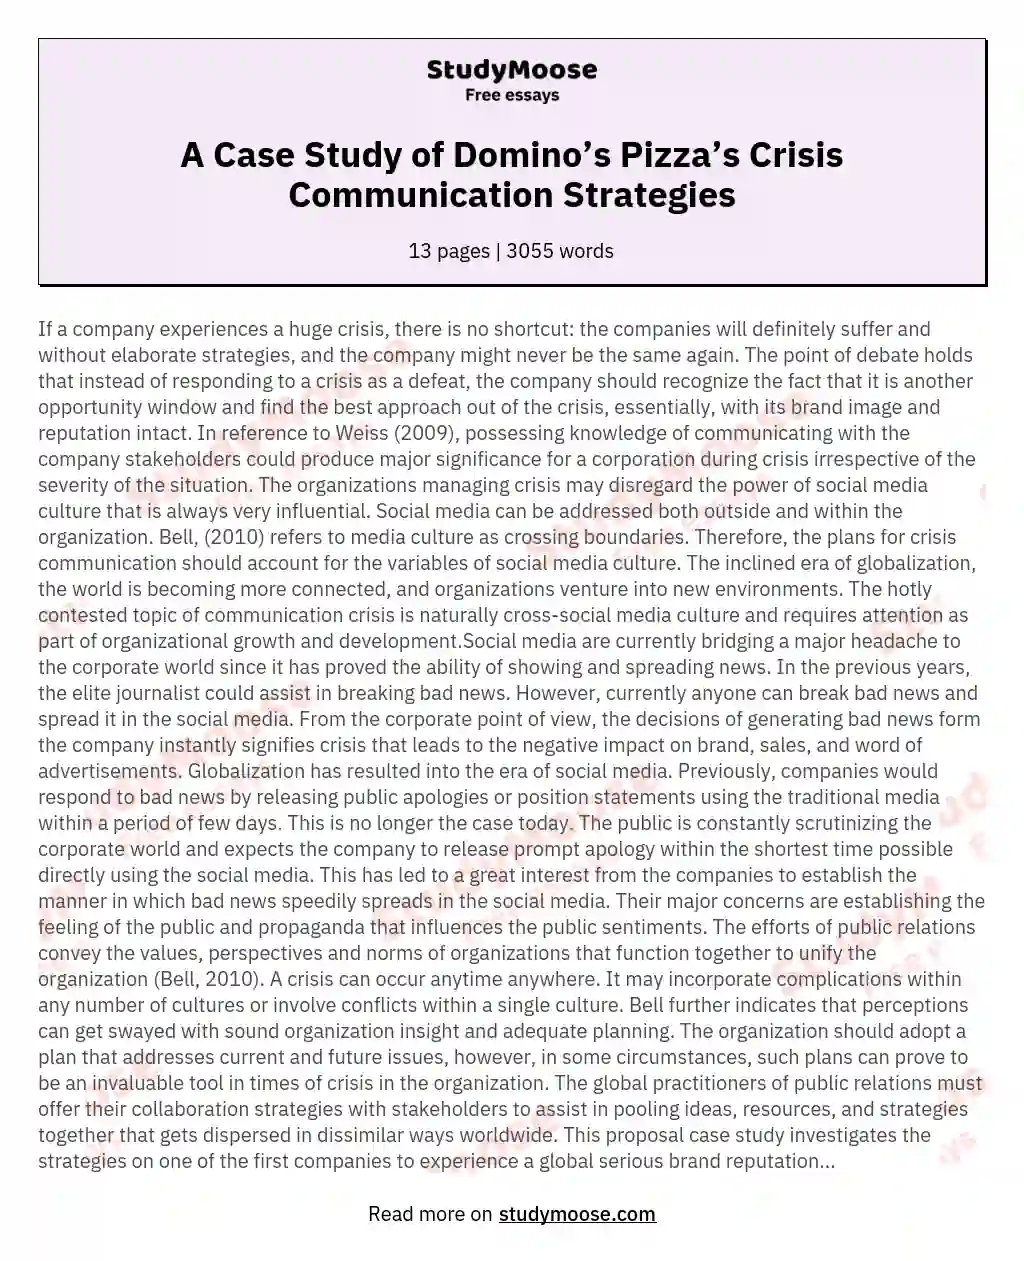 A Case Study of Domino’s Pizza’s Crisis Communication Strategies essay